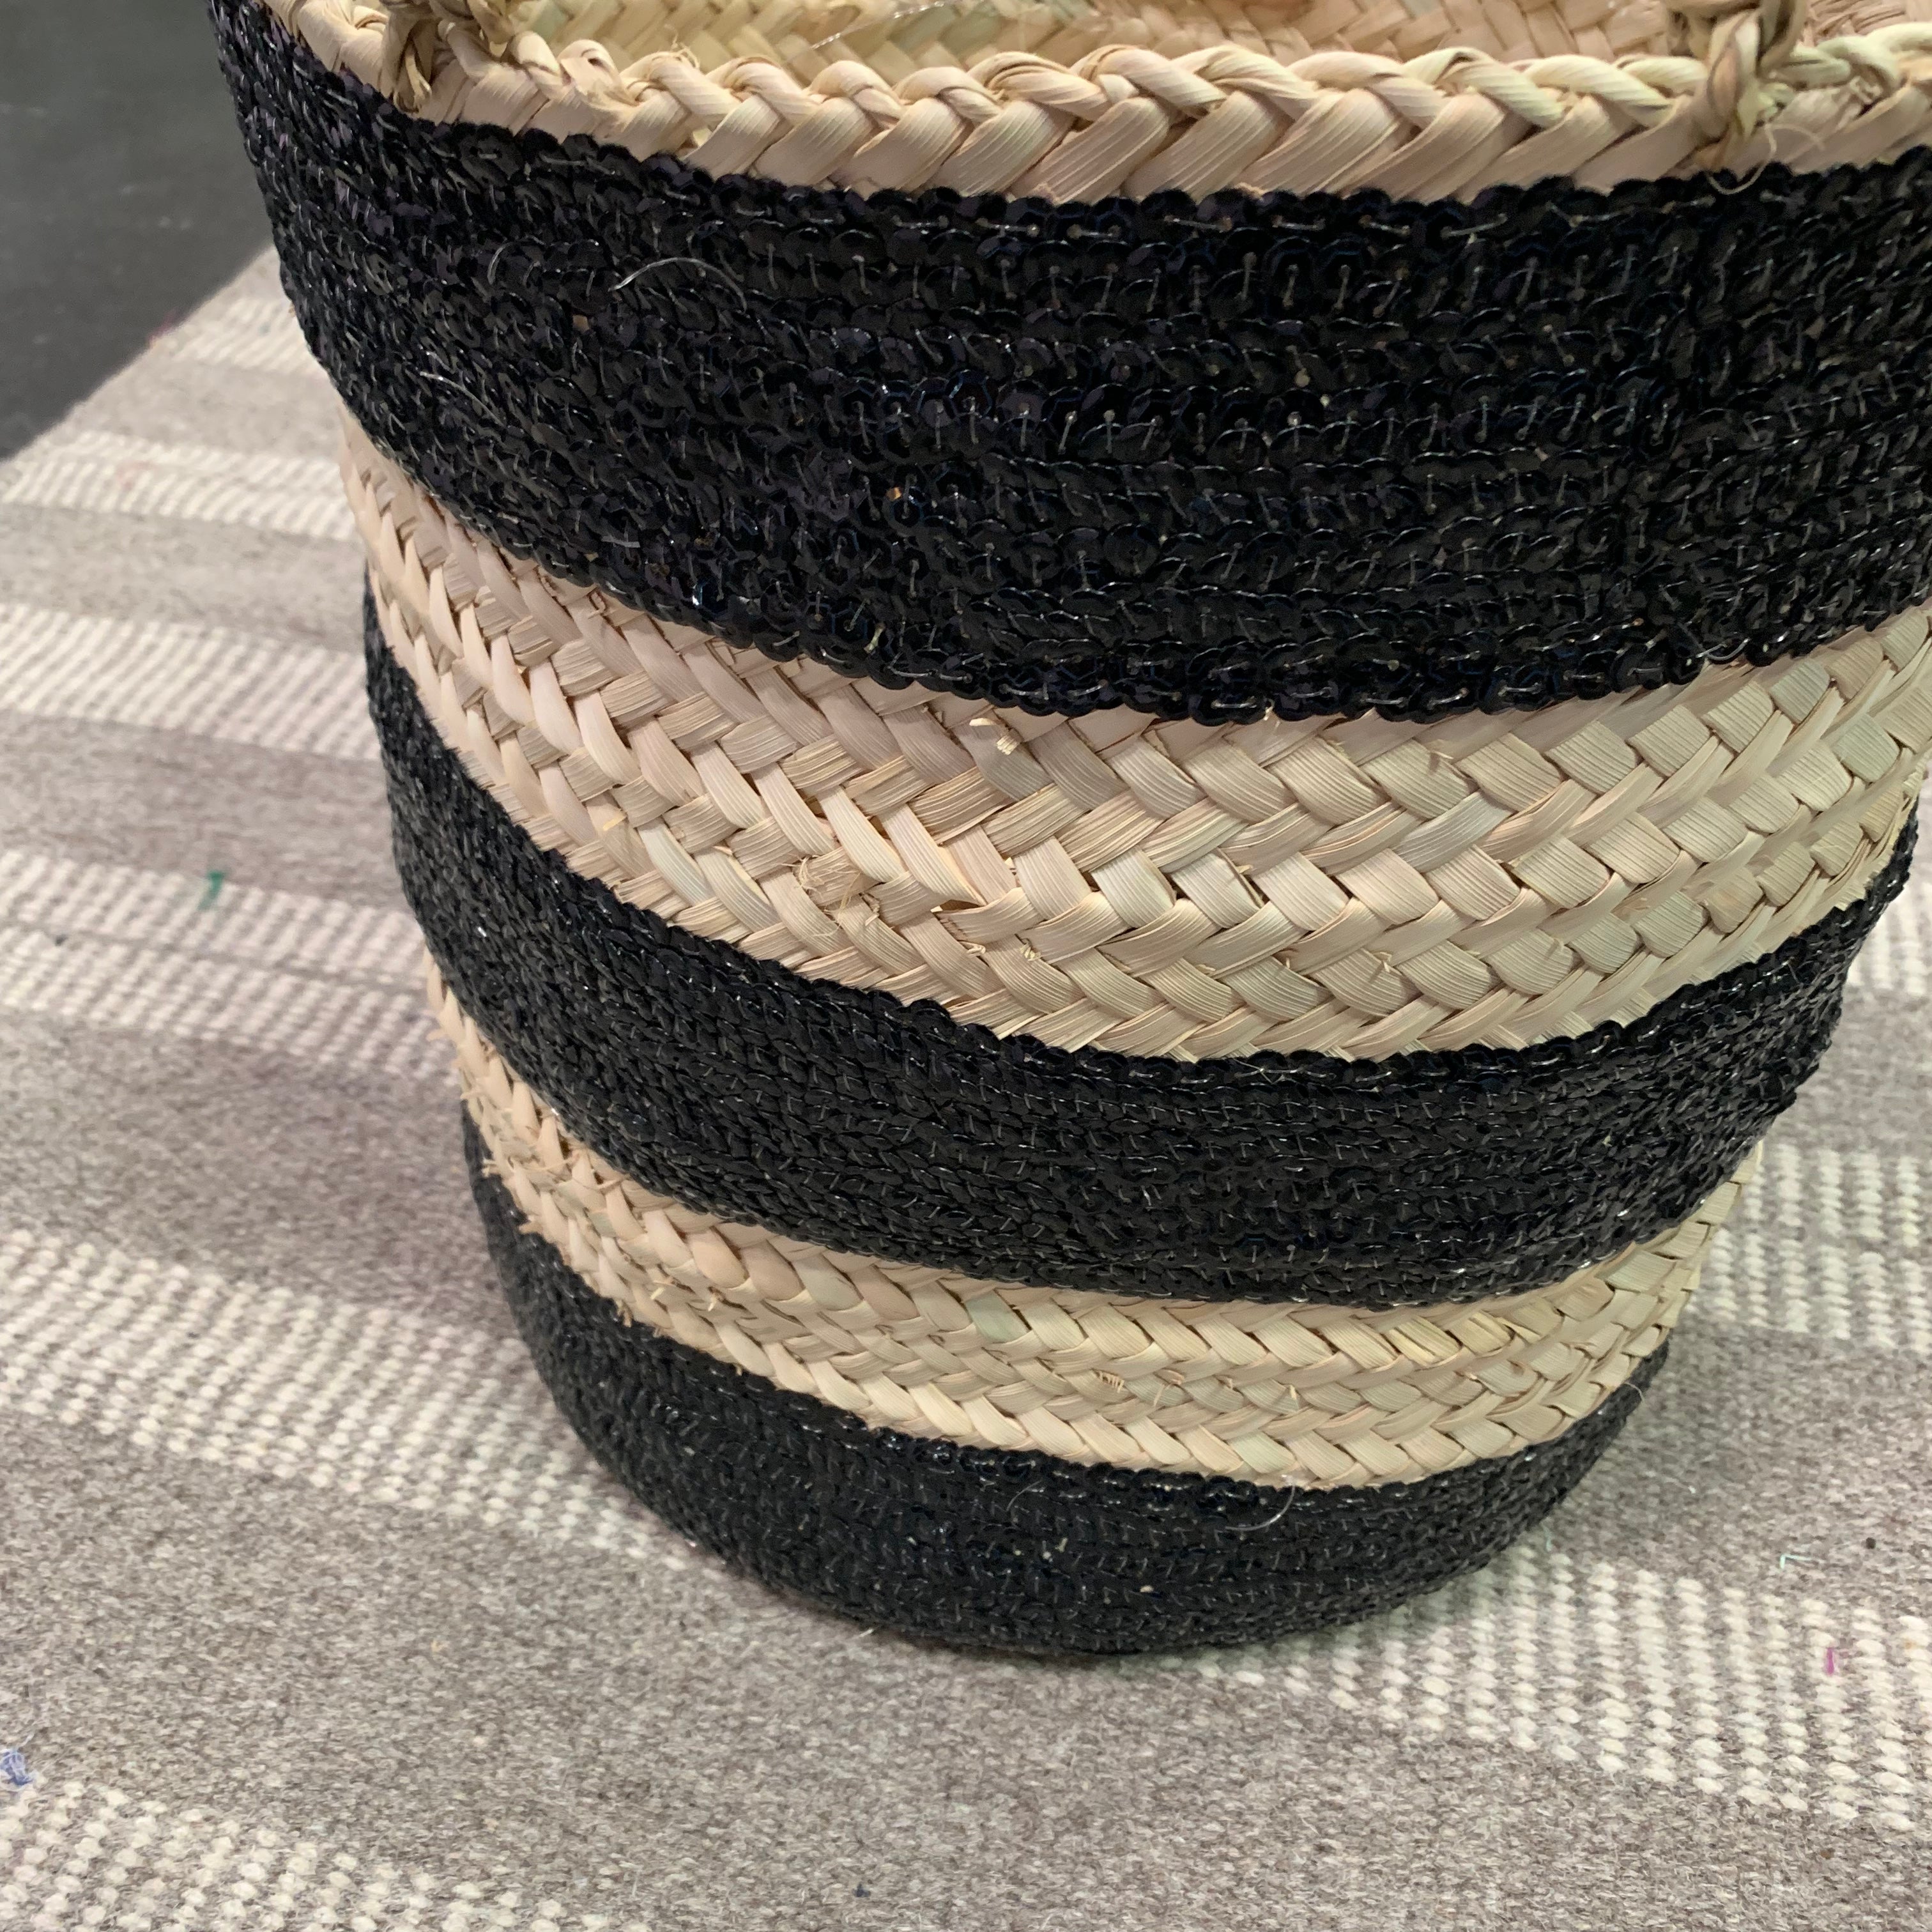 STRIPED Moroccan sequin basket